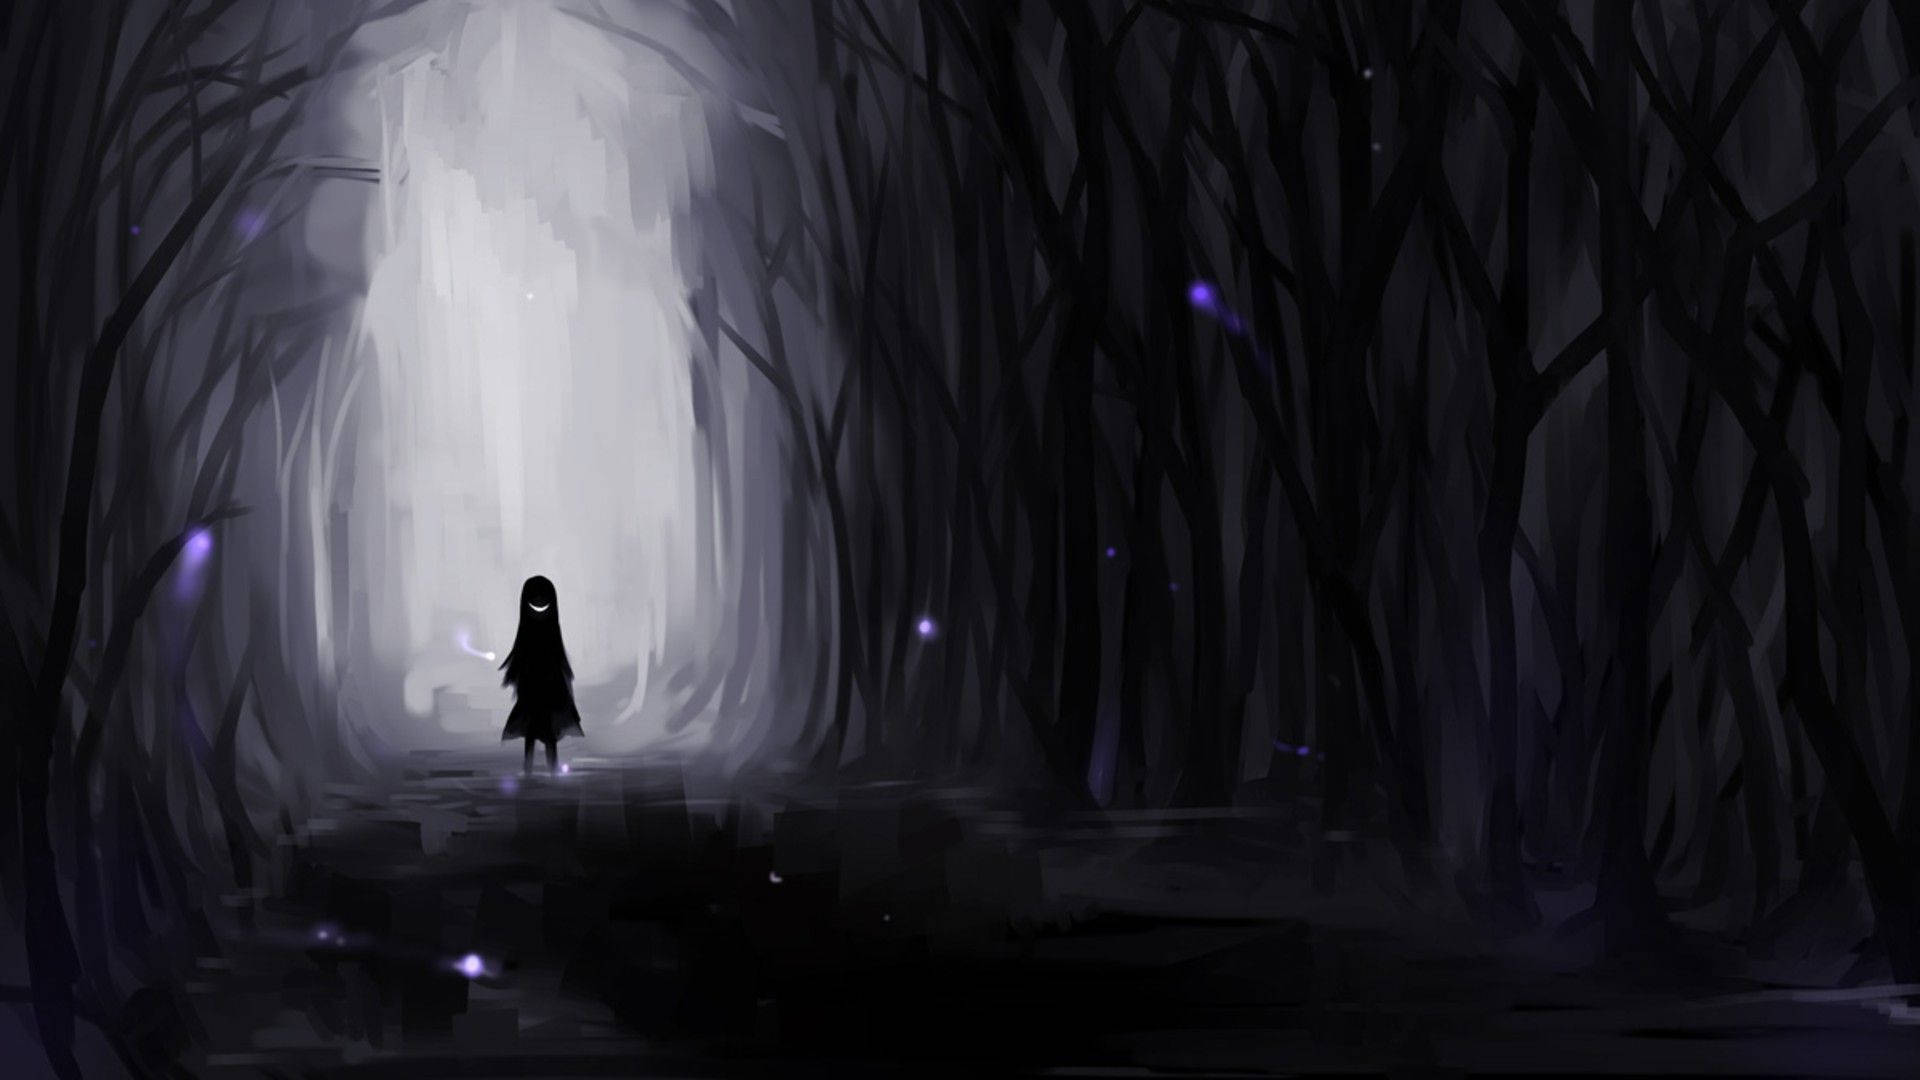 “Lost in thought, the sad anime girl wanders through a dark forest.” Wallpaper